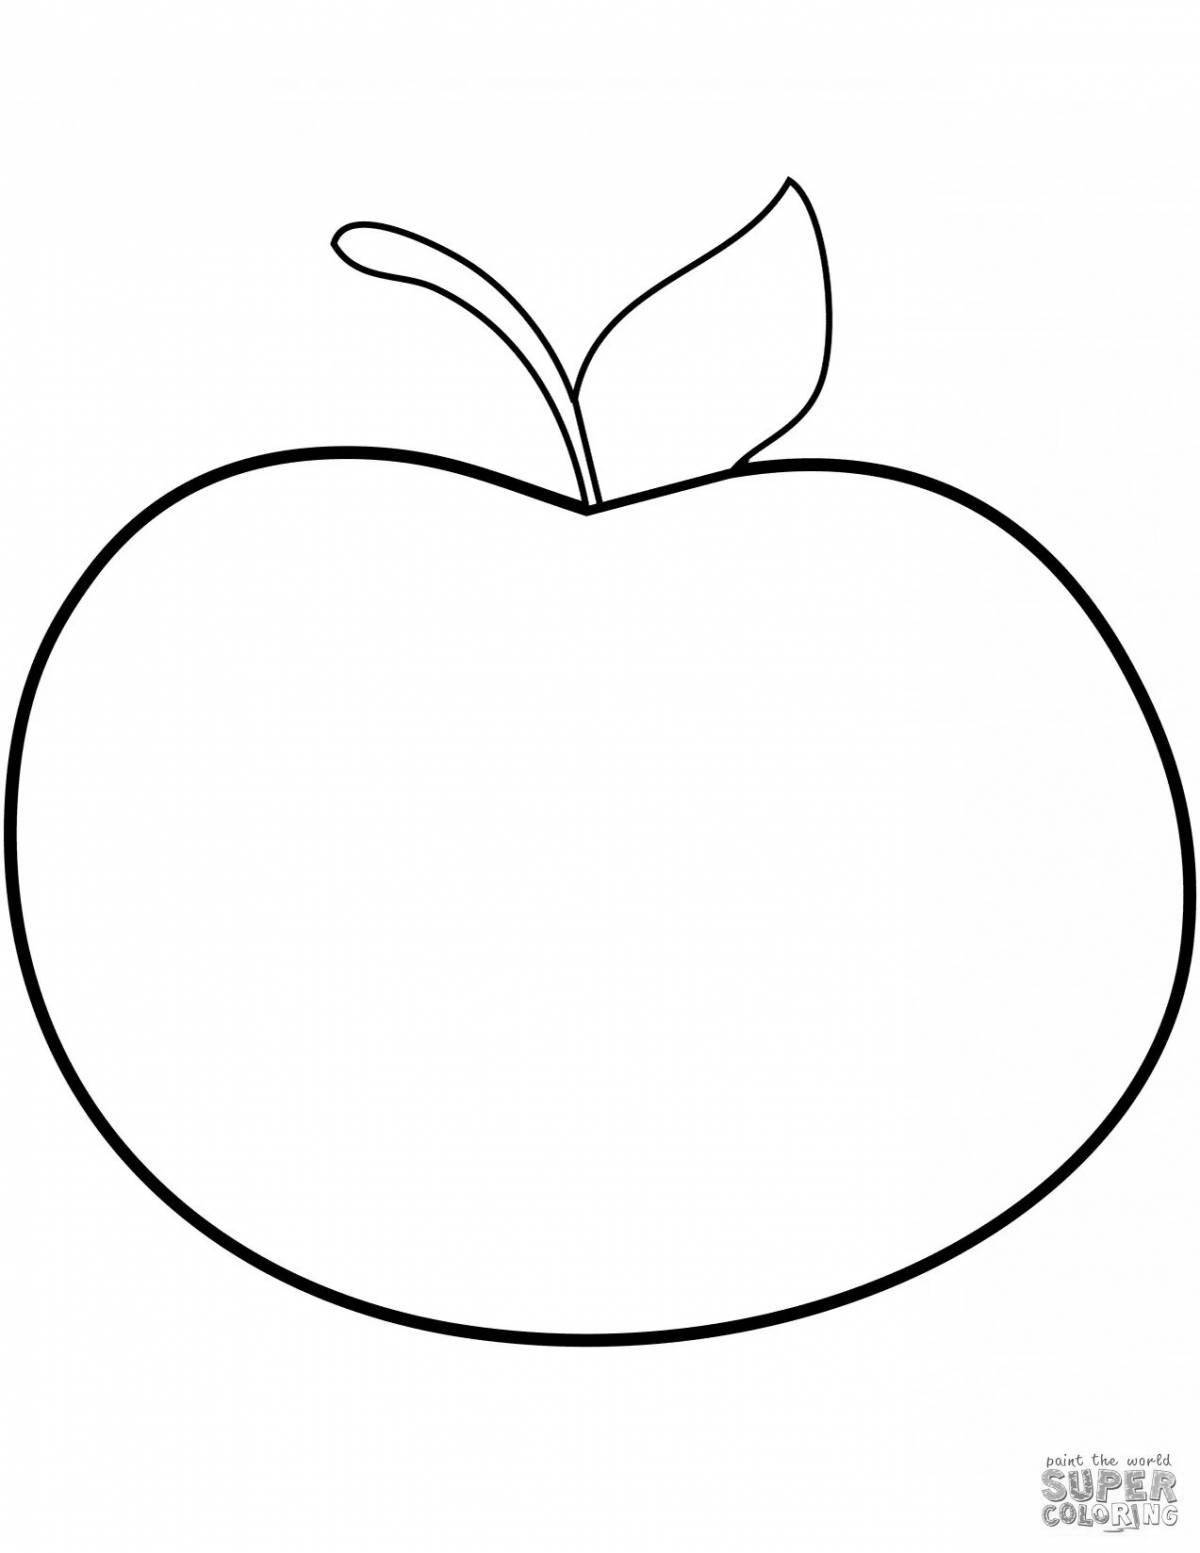 Coloring book with a playful drawing of an apple